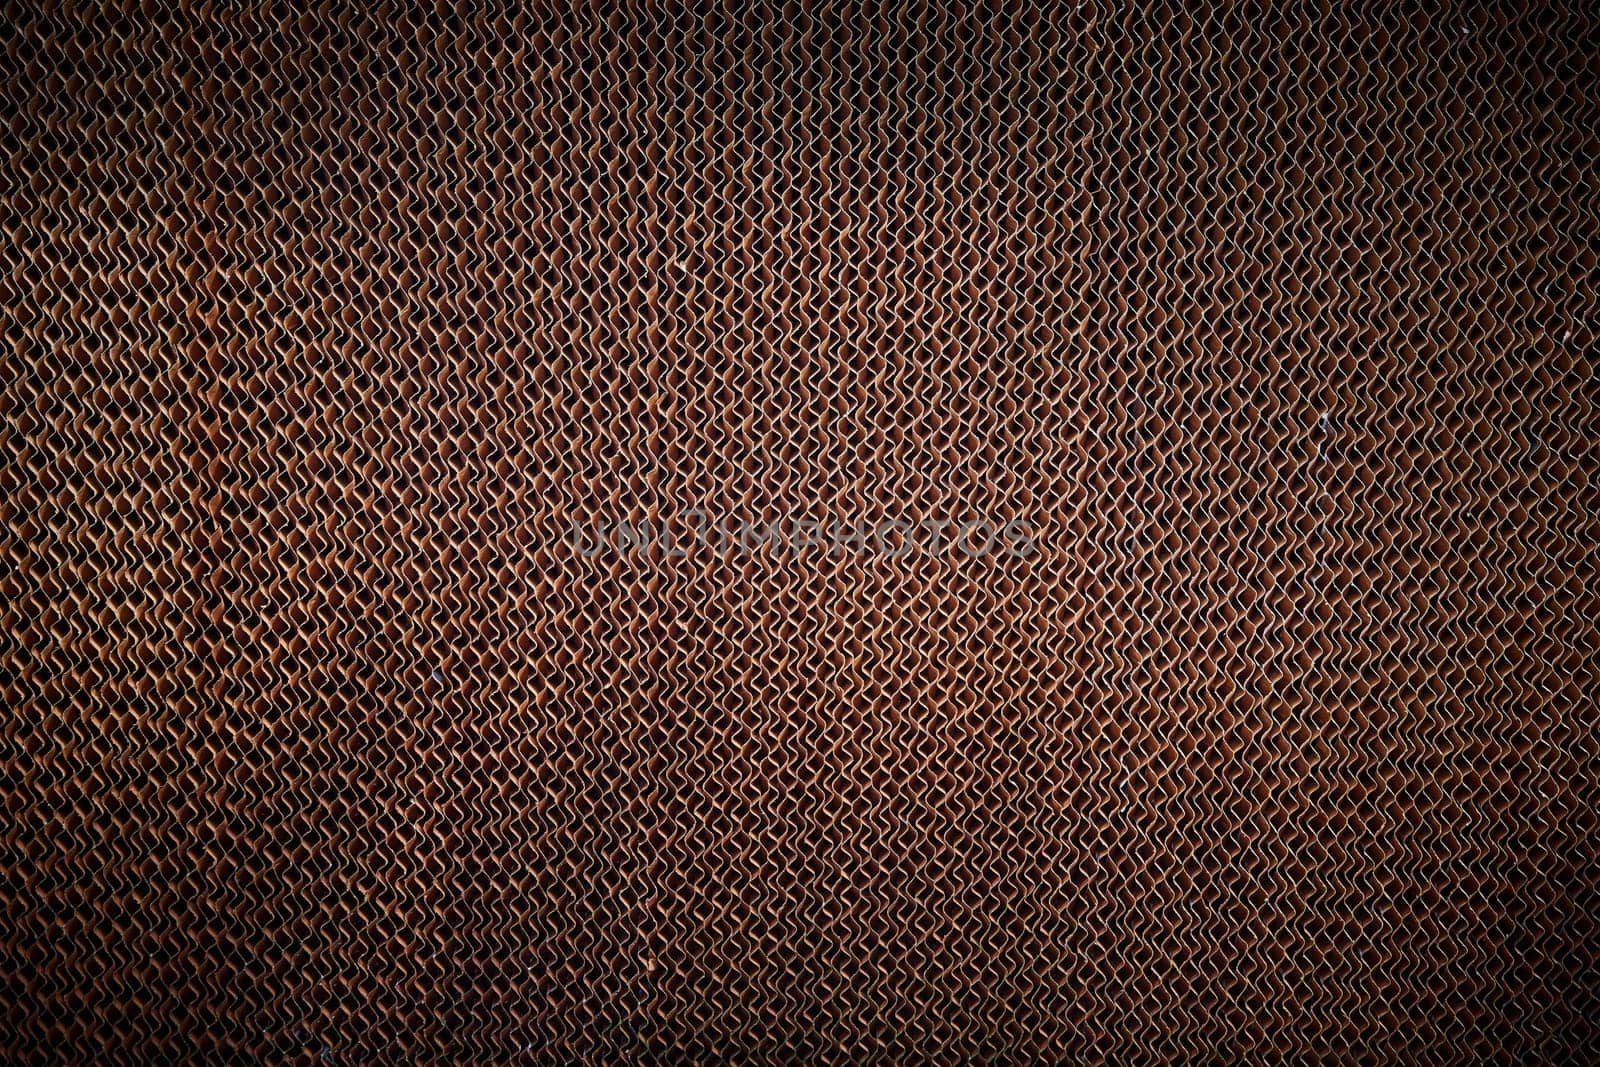 Copper Metal Mesh Texture - Industrial Diamond Pattern Background by njproductions